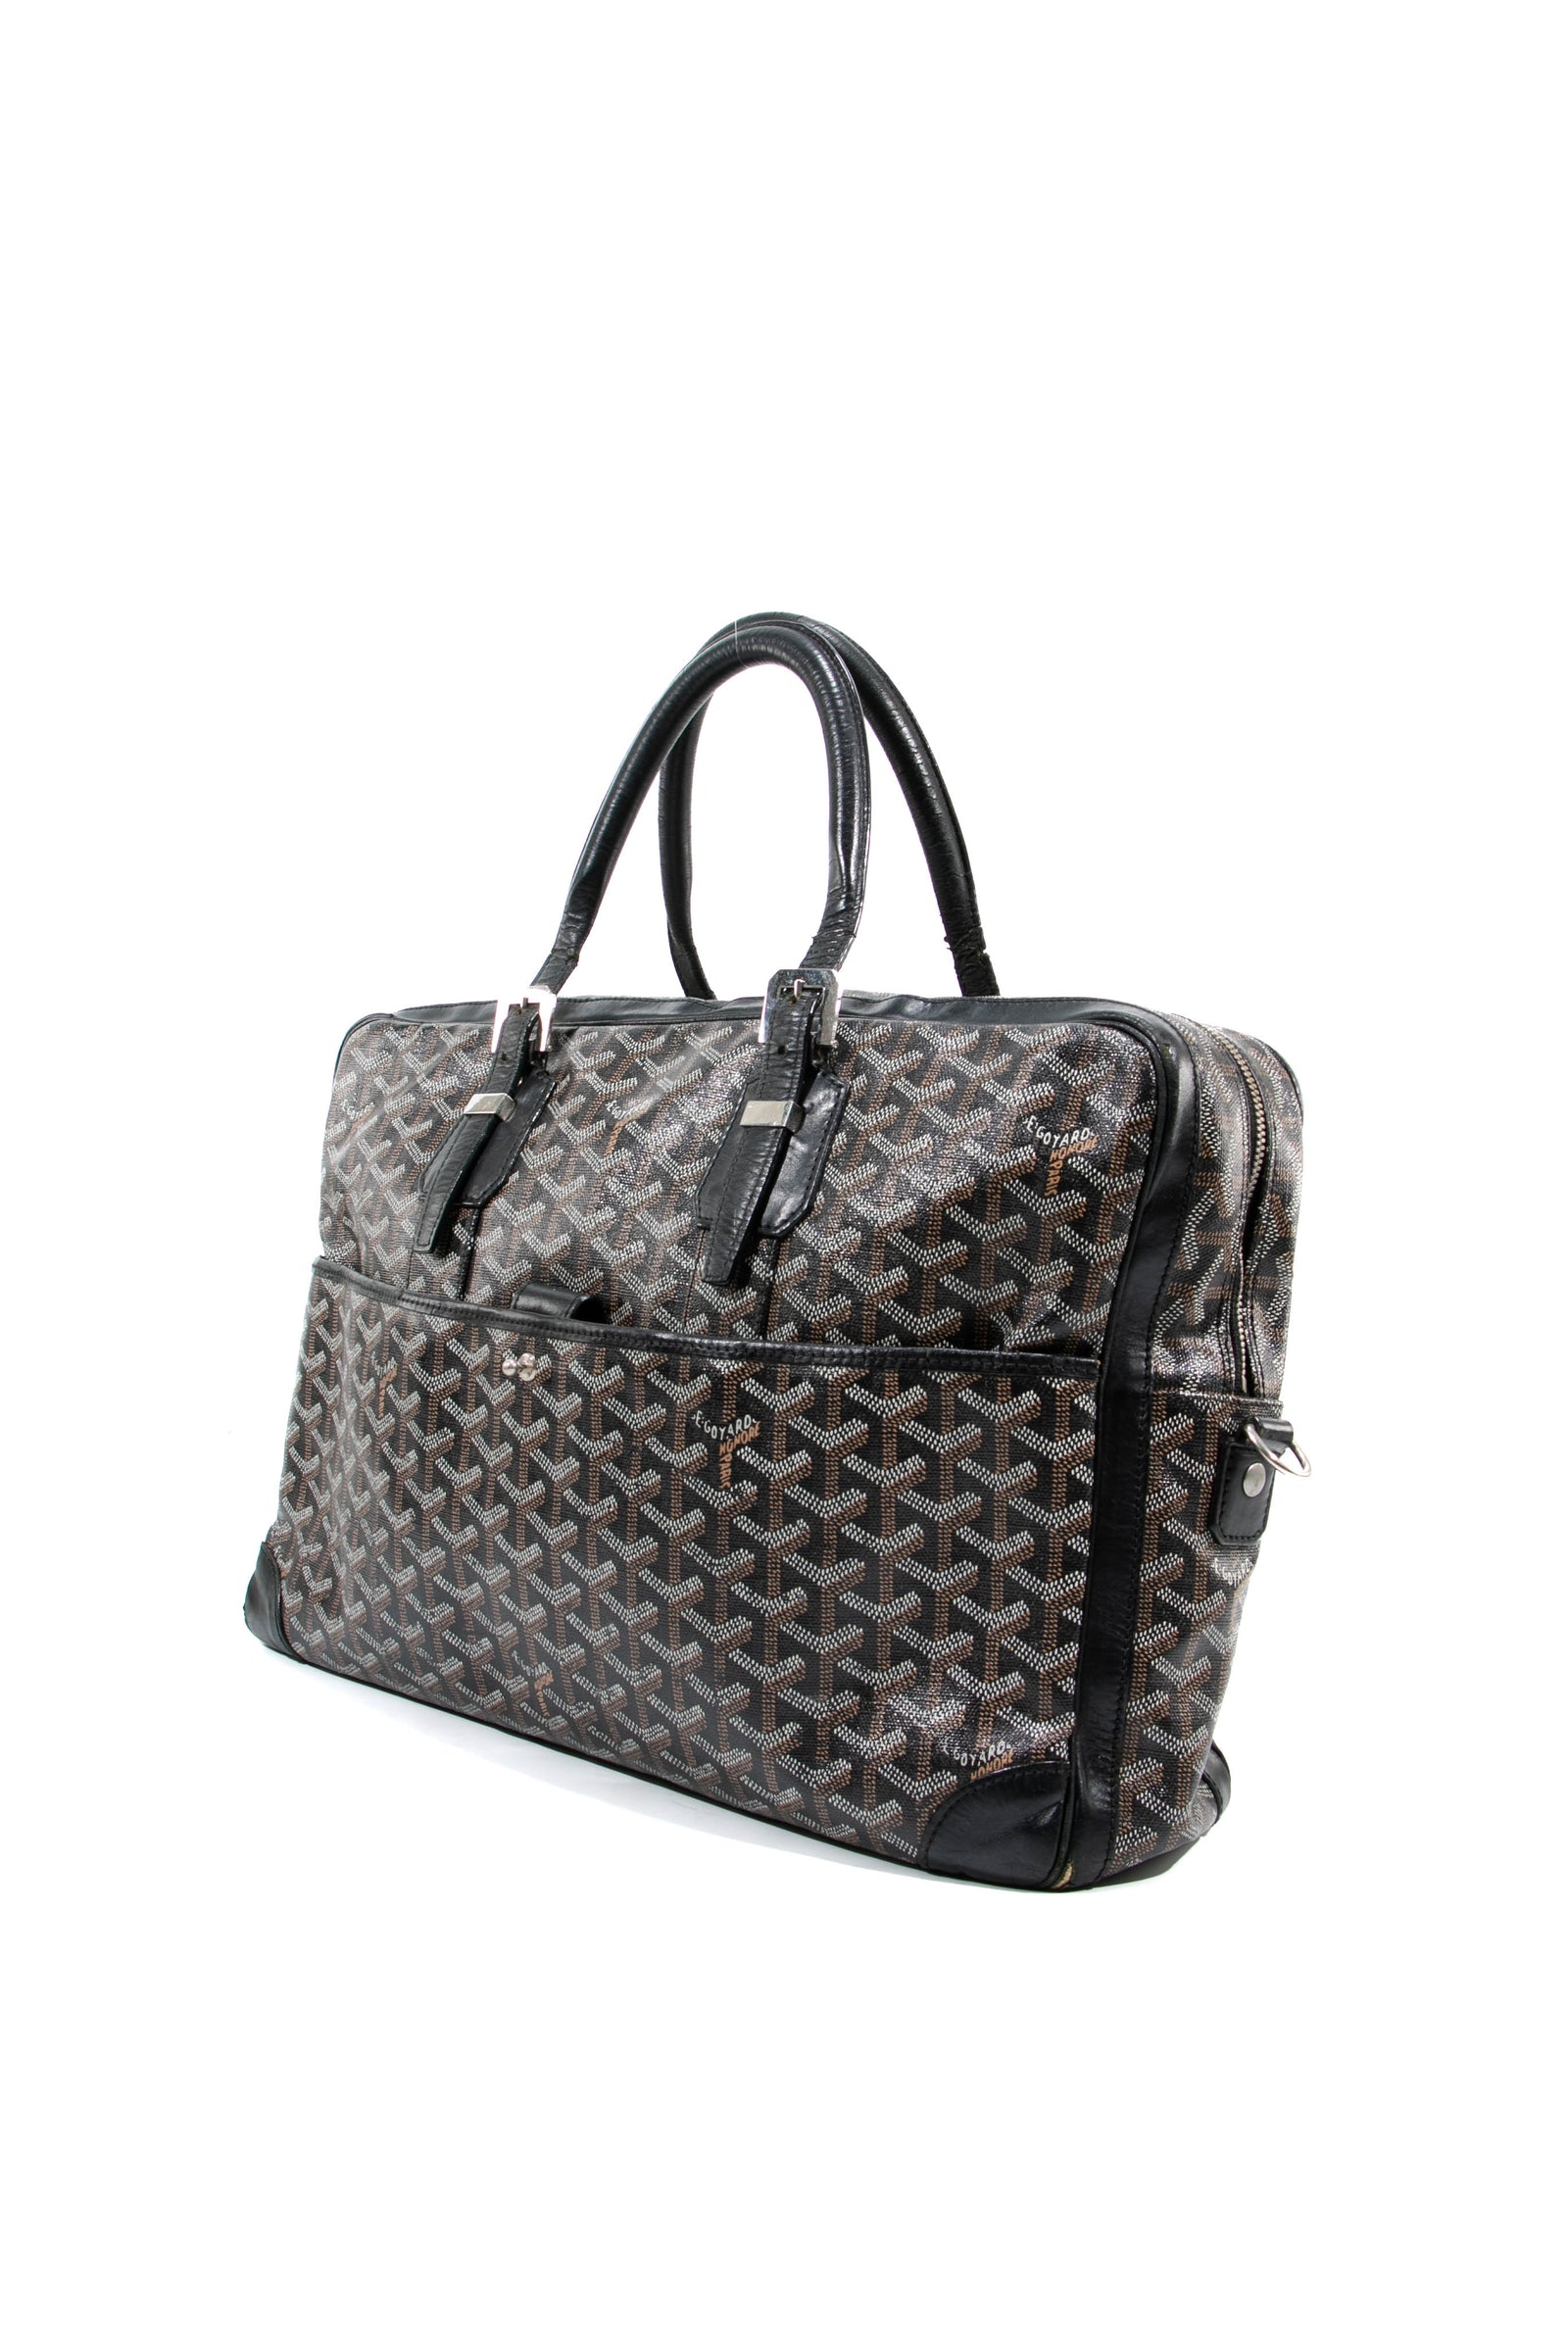 Easy to clean Goyard Black Coated Canvas And Leather Caravelle 60 Suitcase  For Men, in sale Goyard Sales Shop